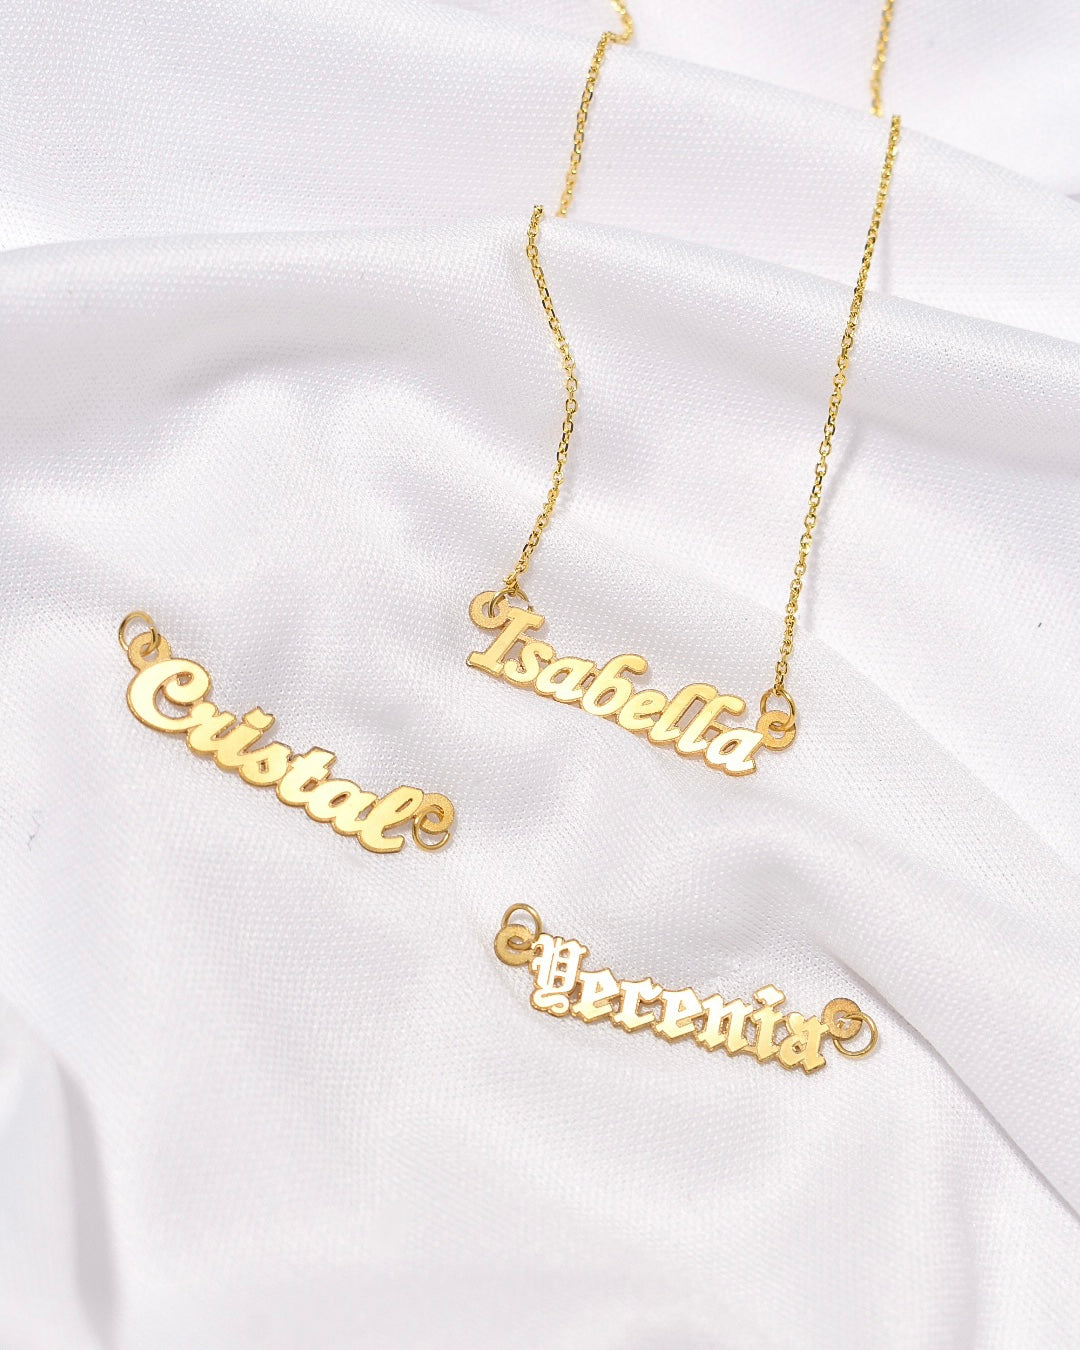 Personalized name necklace in solid gold or sterling silver